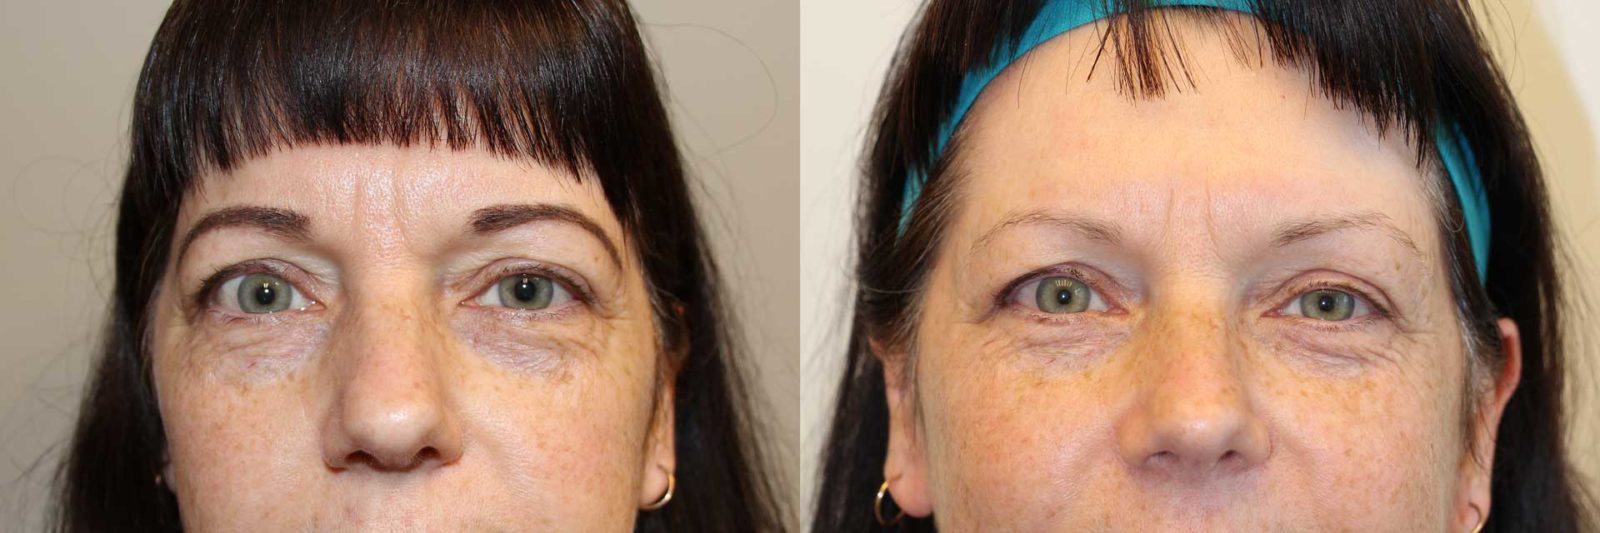 Eyelid Surgery Blepharoplasty Before And After Photos Dr Anzarut My Xxx Hot Girl 